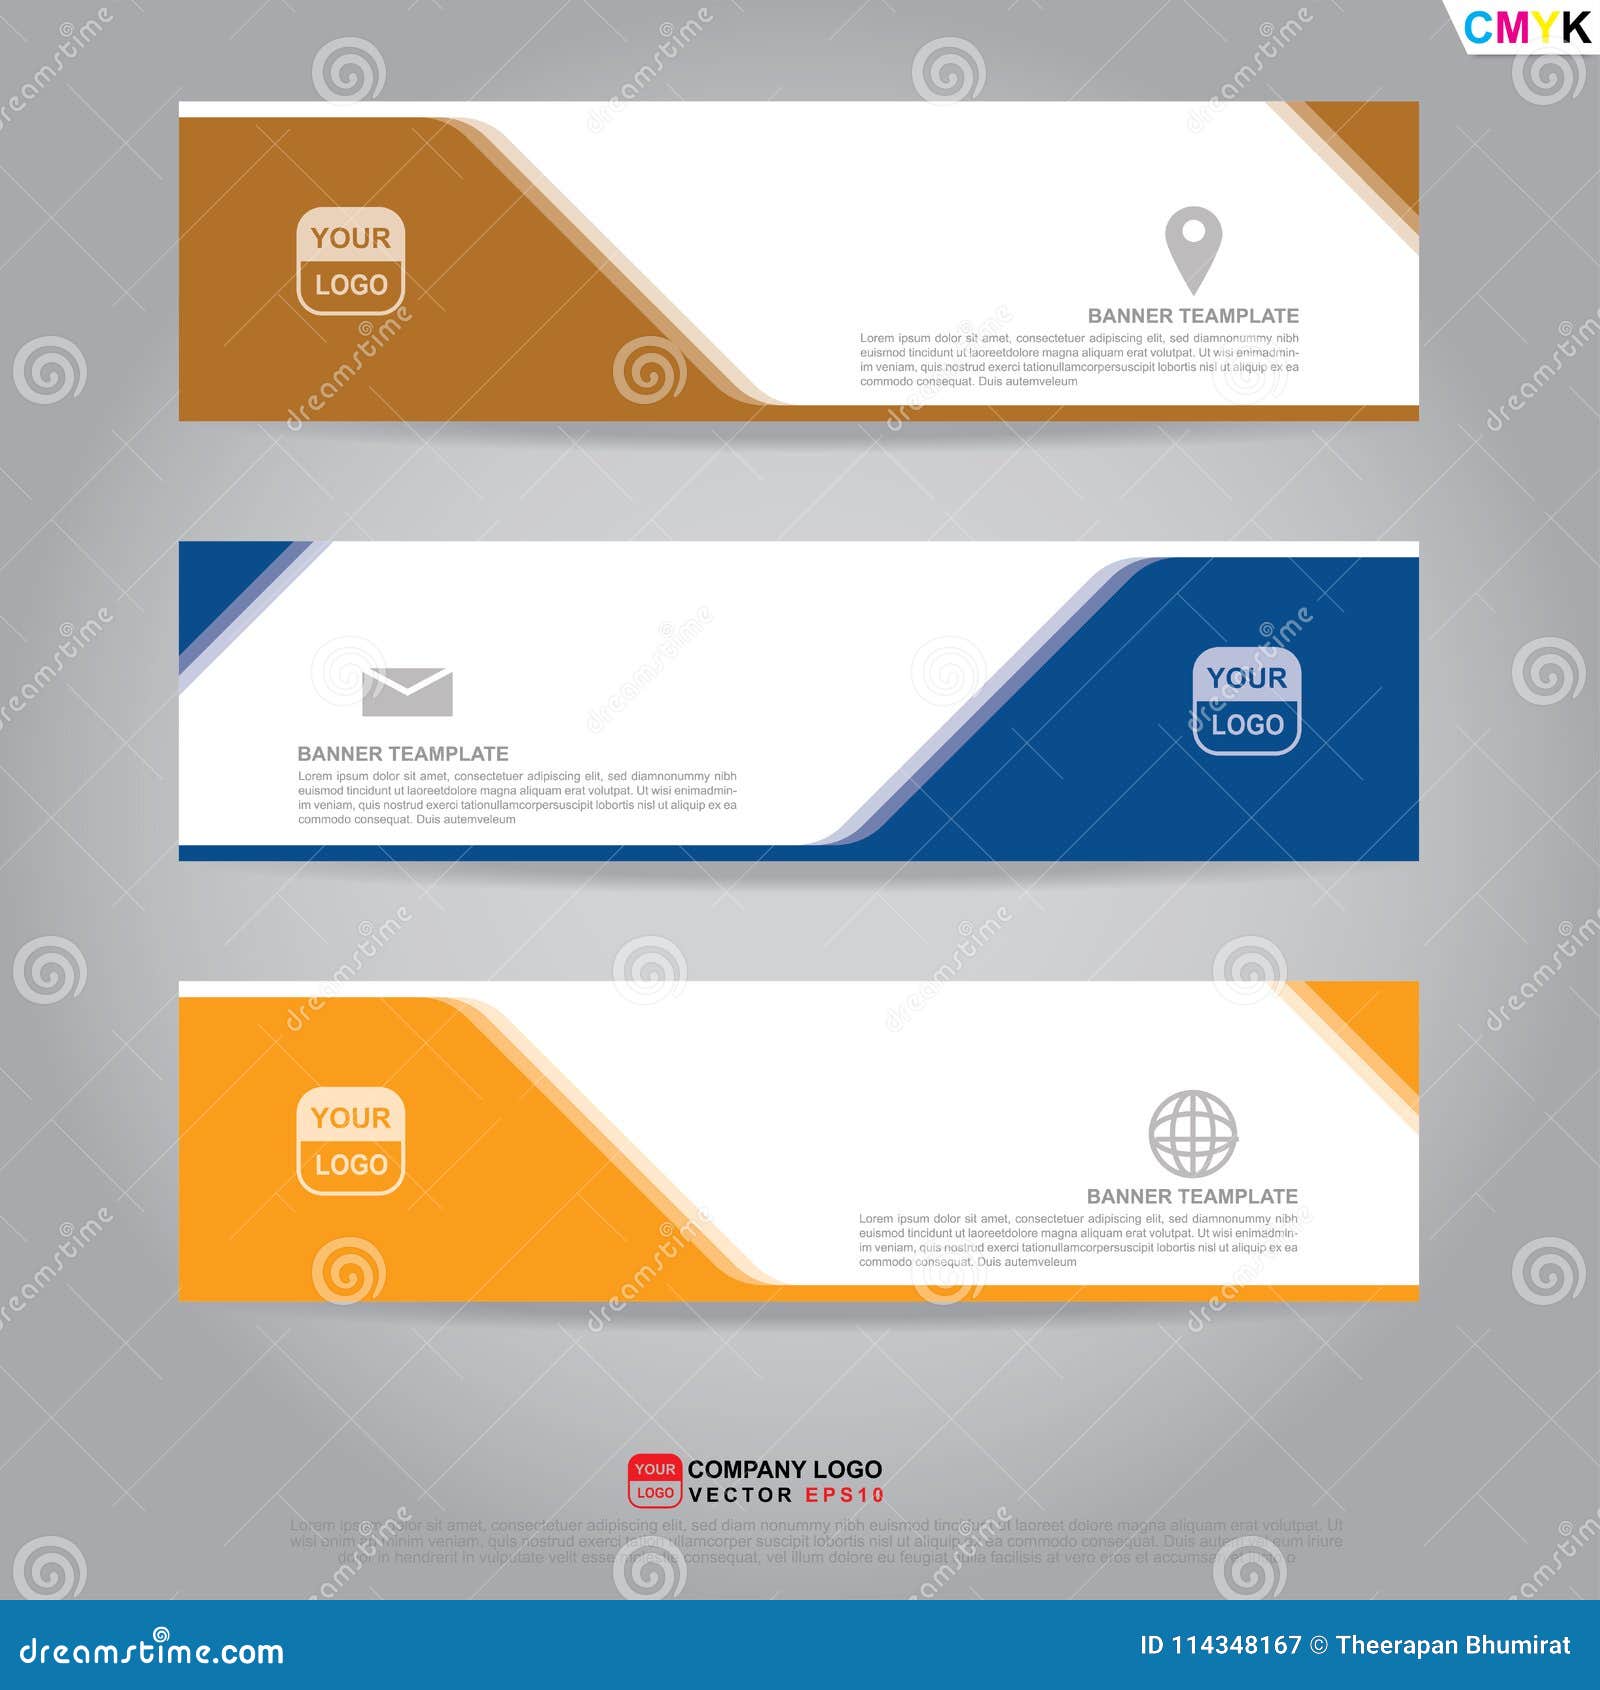 template of banner, brochure, flyer and card voucher for header